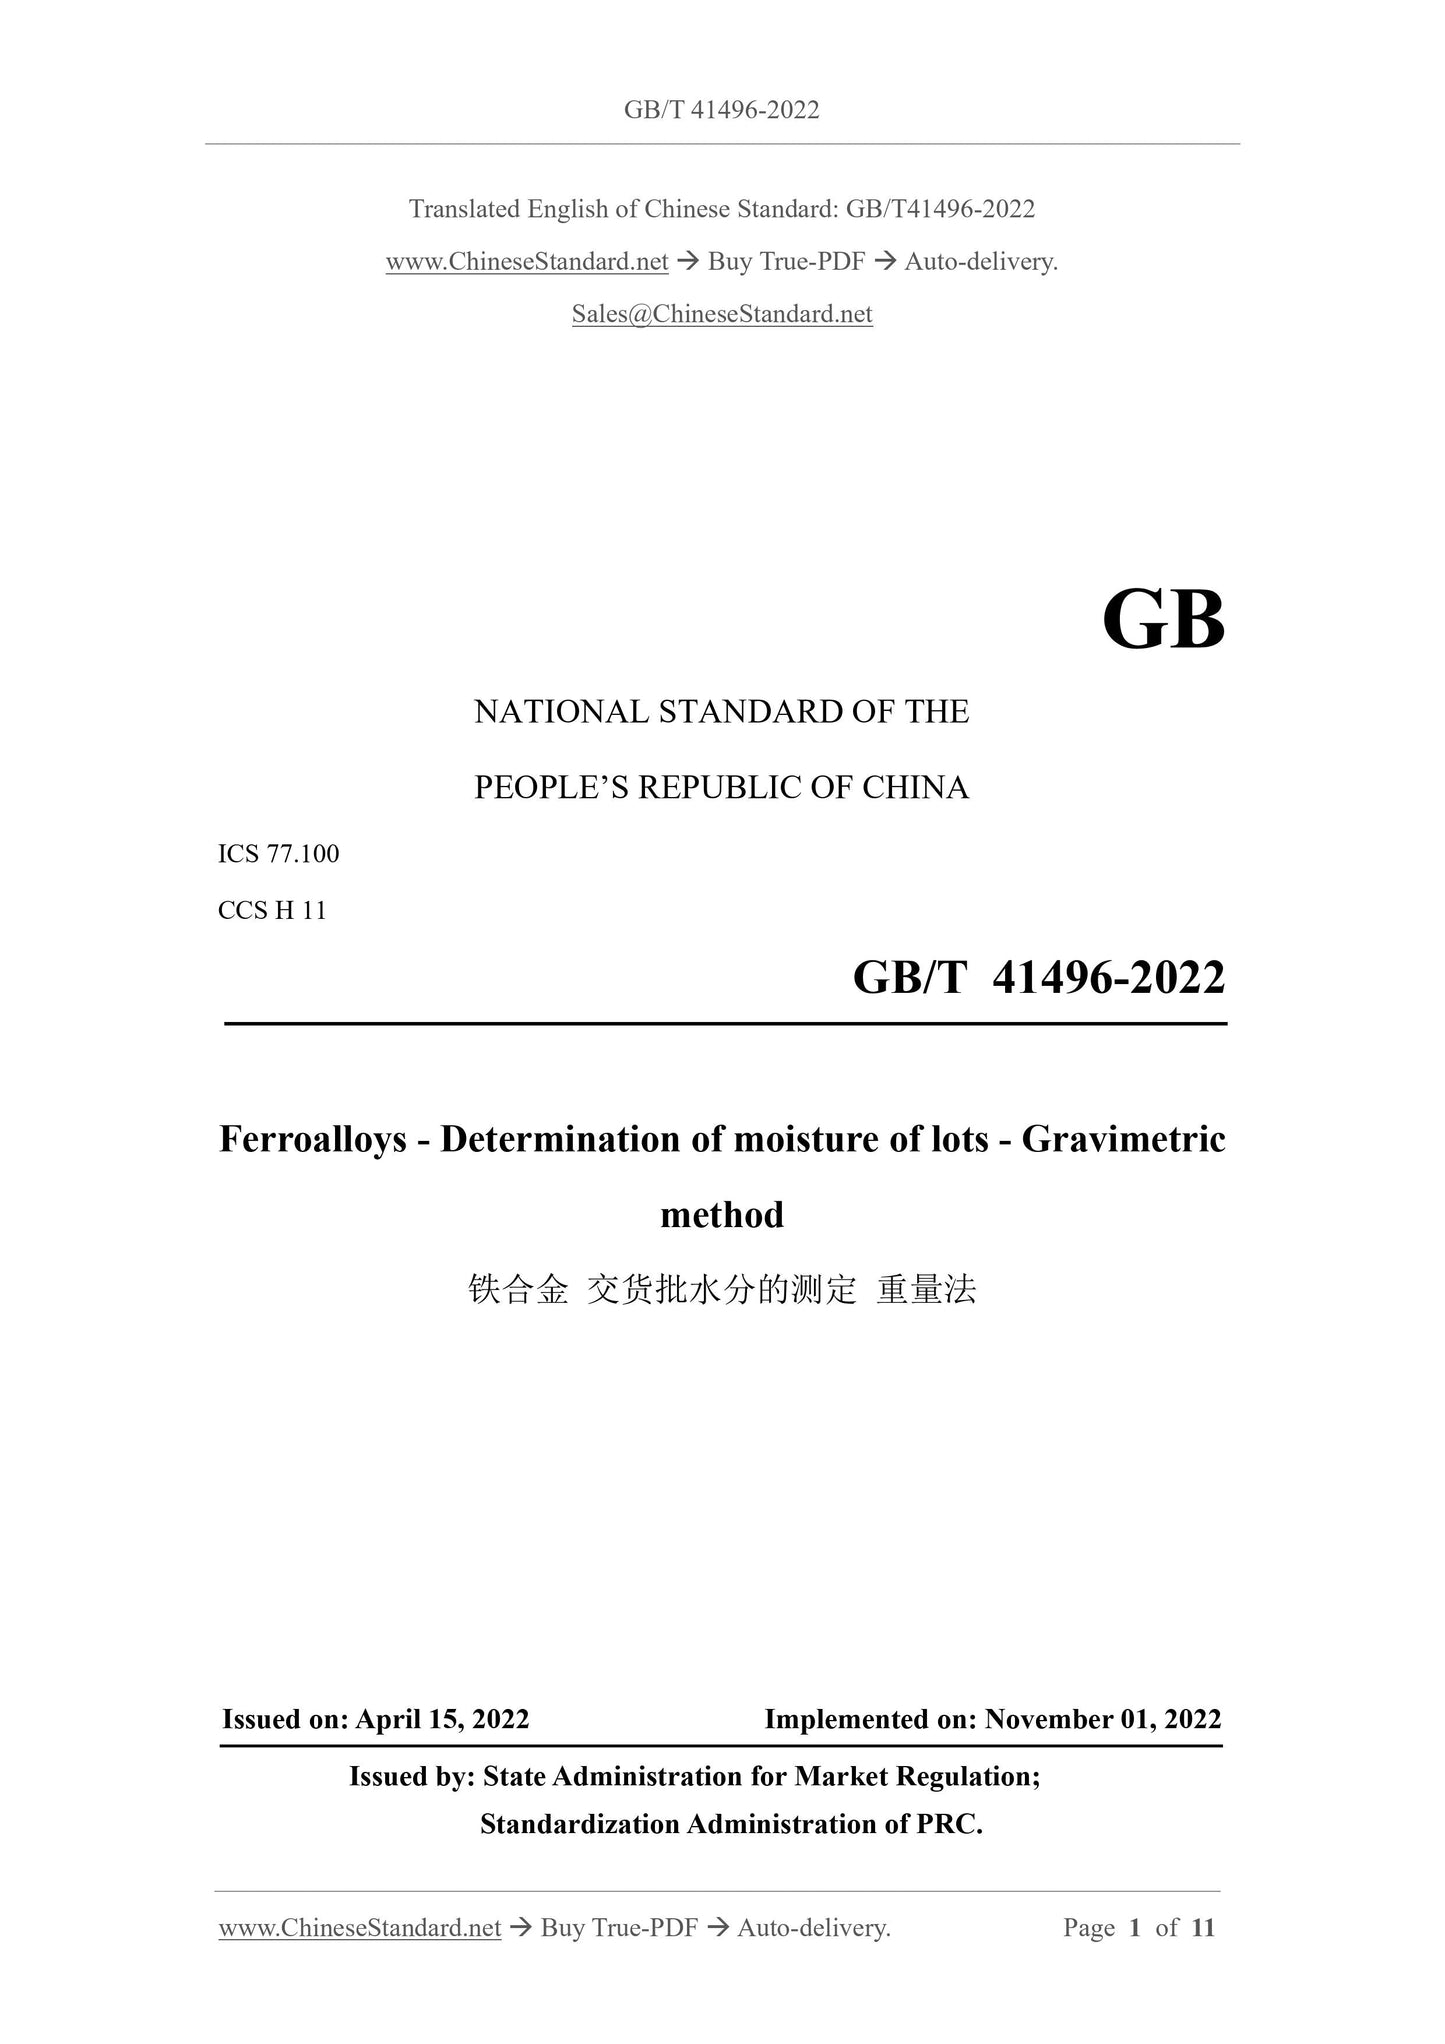 GB/T 41496-2022 Page 1